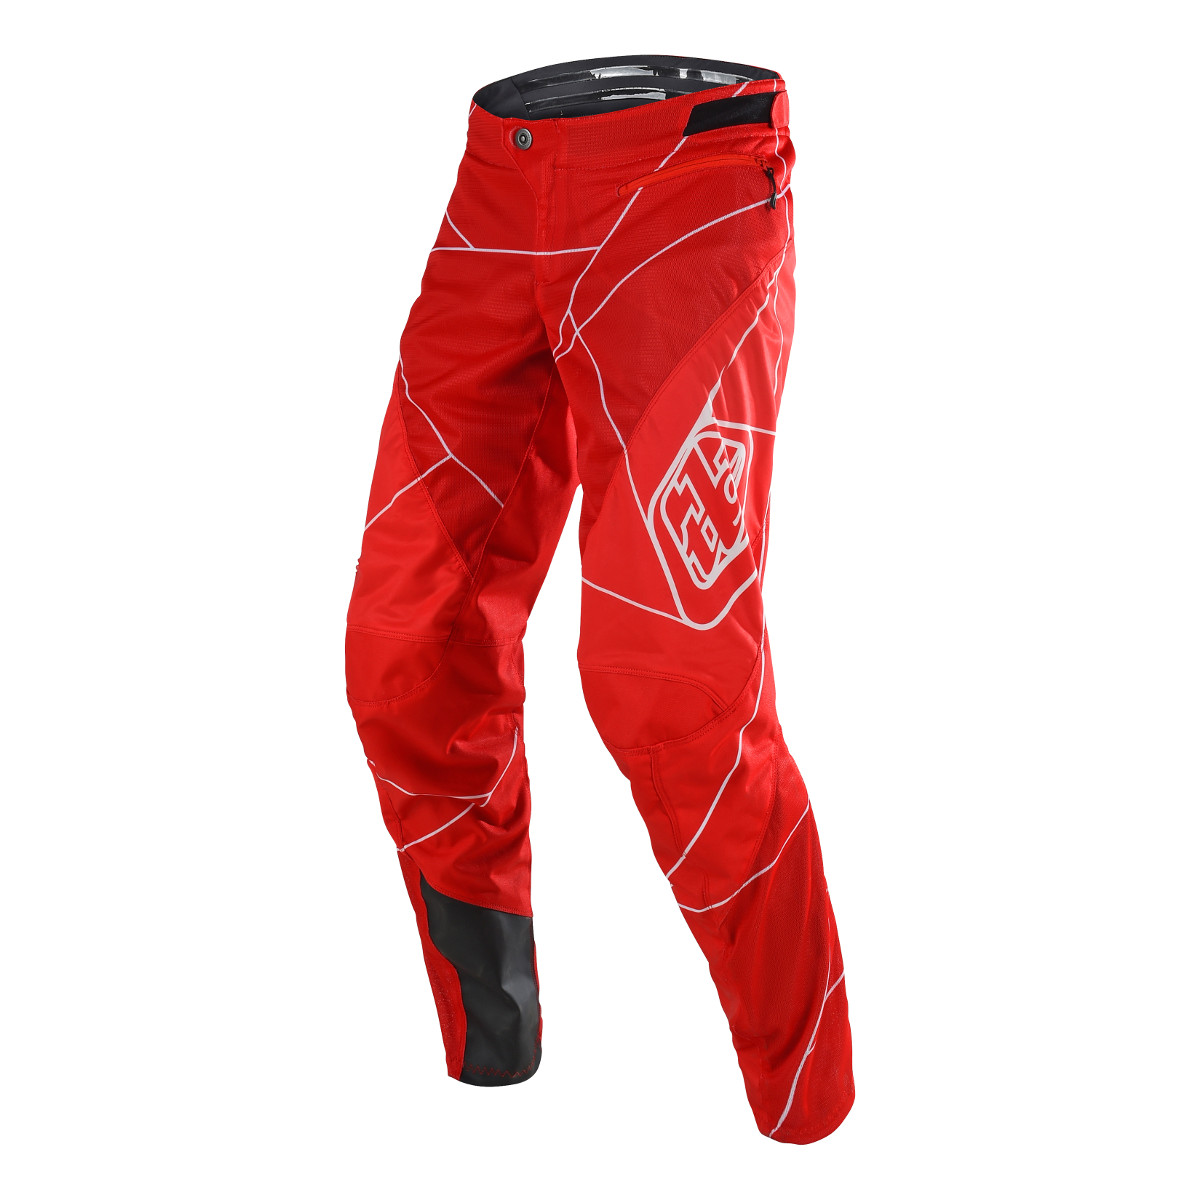 Troy Lee Designs Downhill Pants Sprint Metric - Red/White